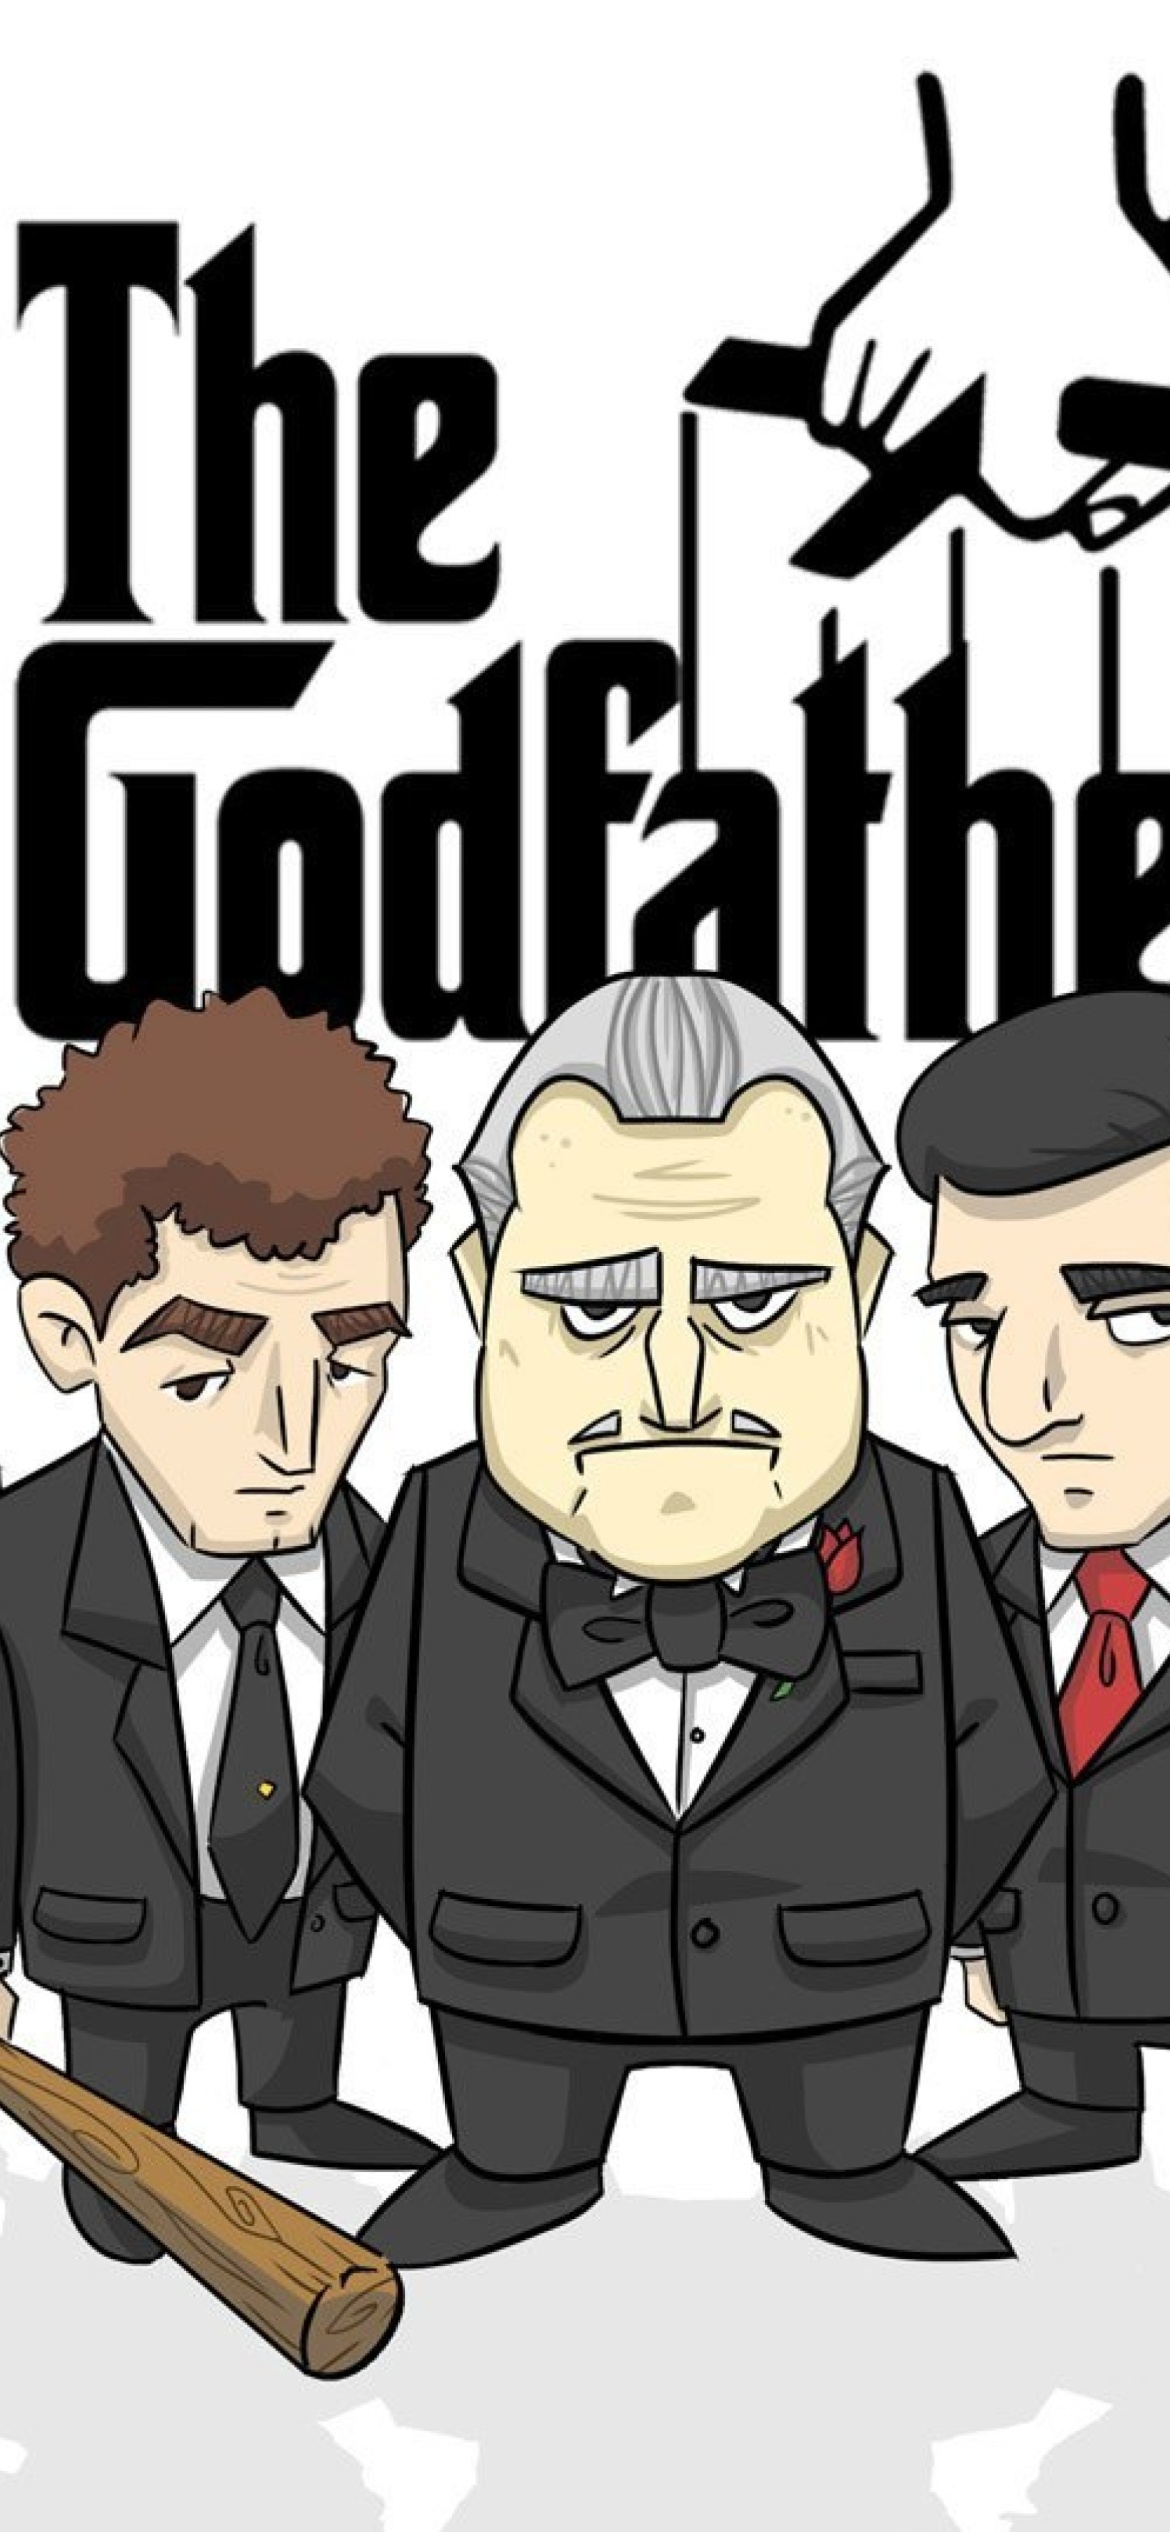 The Godfather Crime Film wallpaper 1170x2532